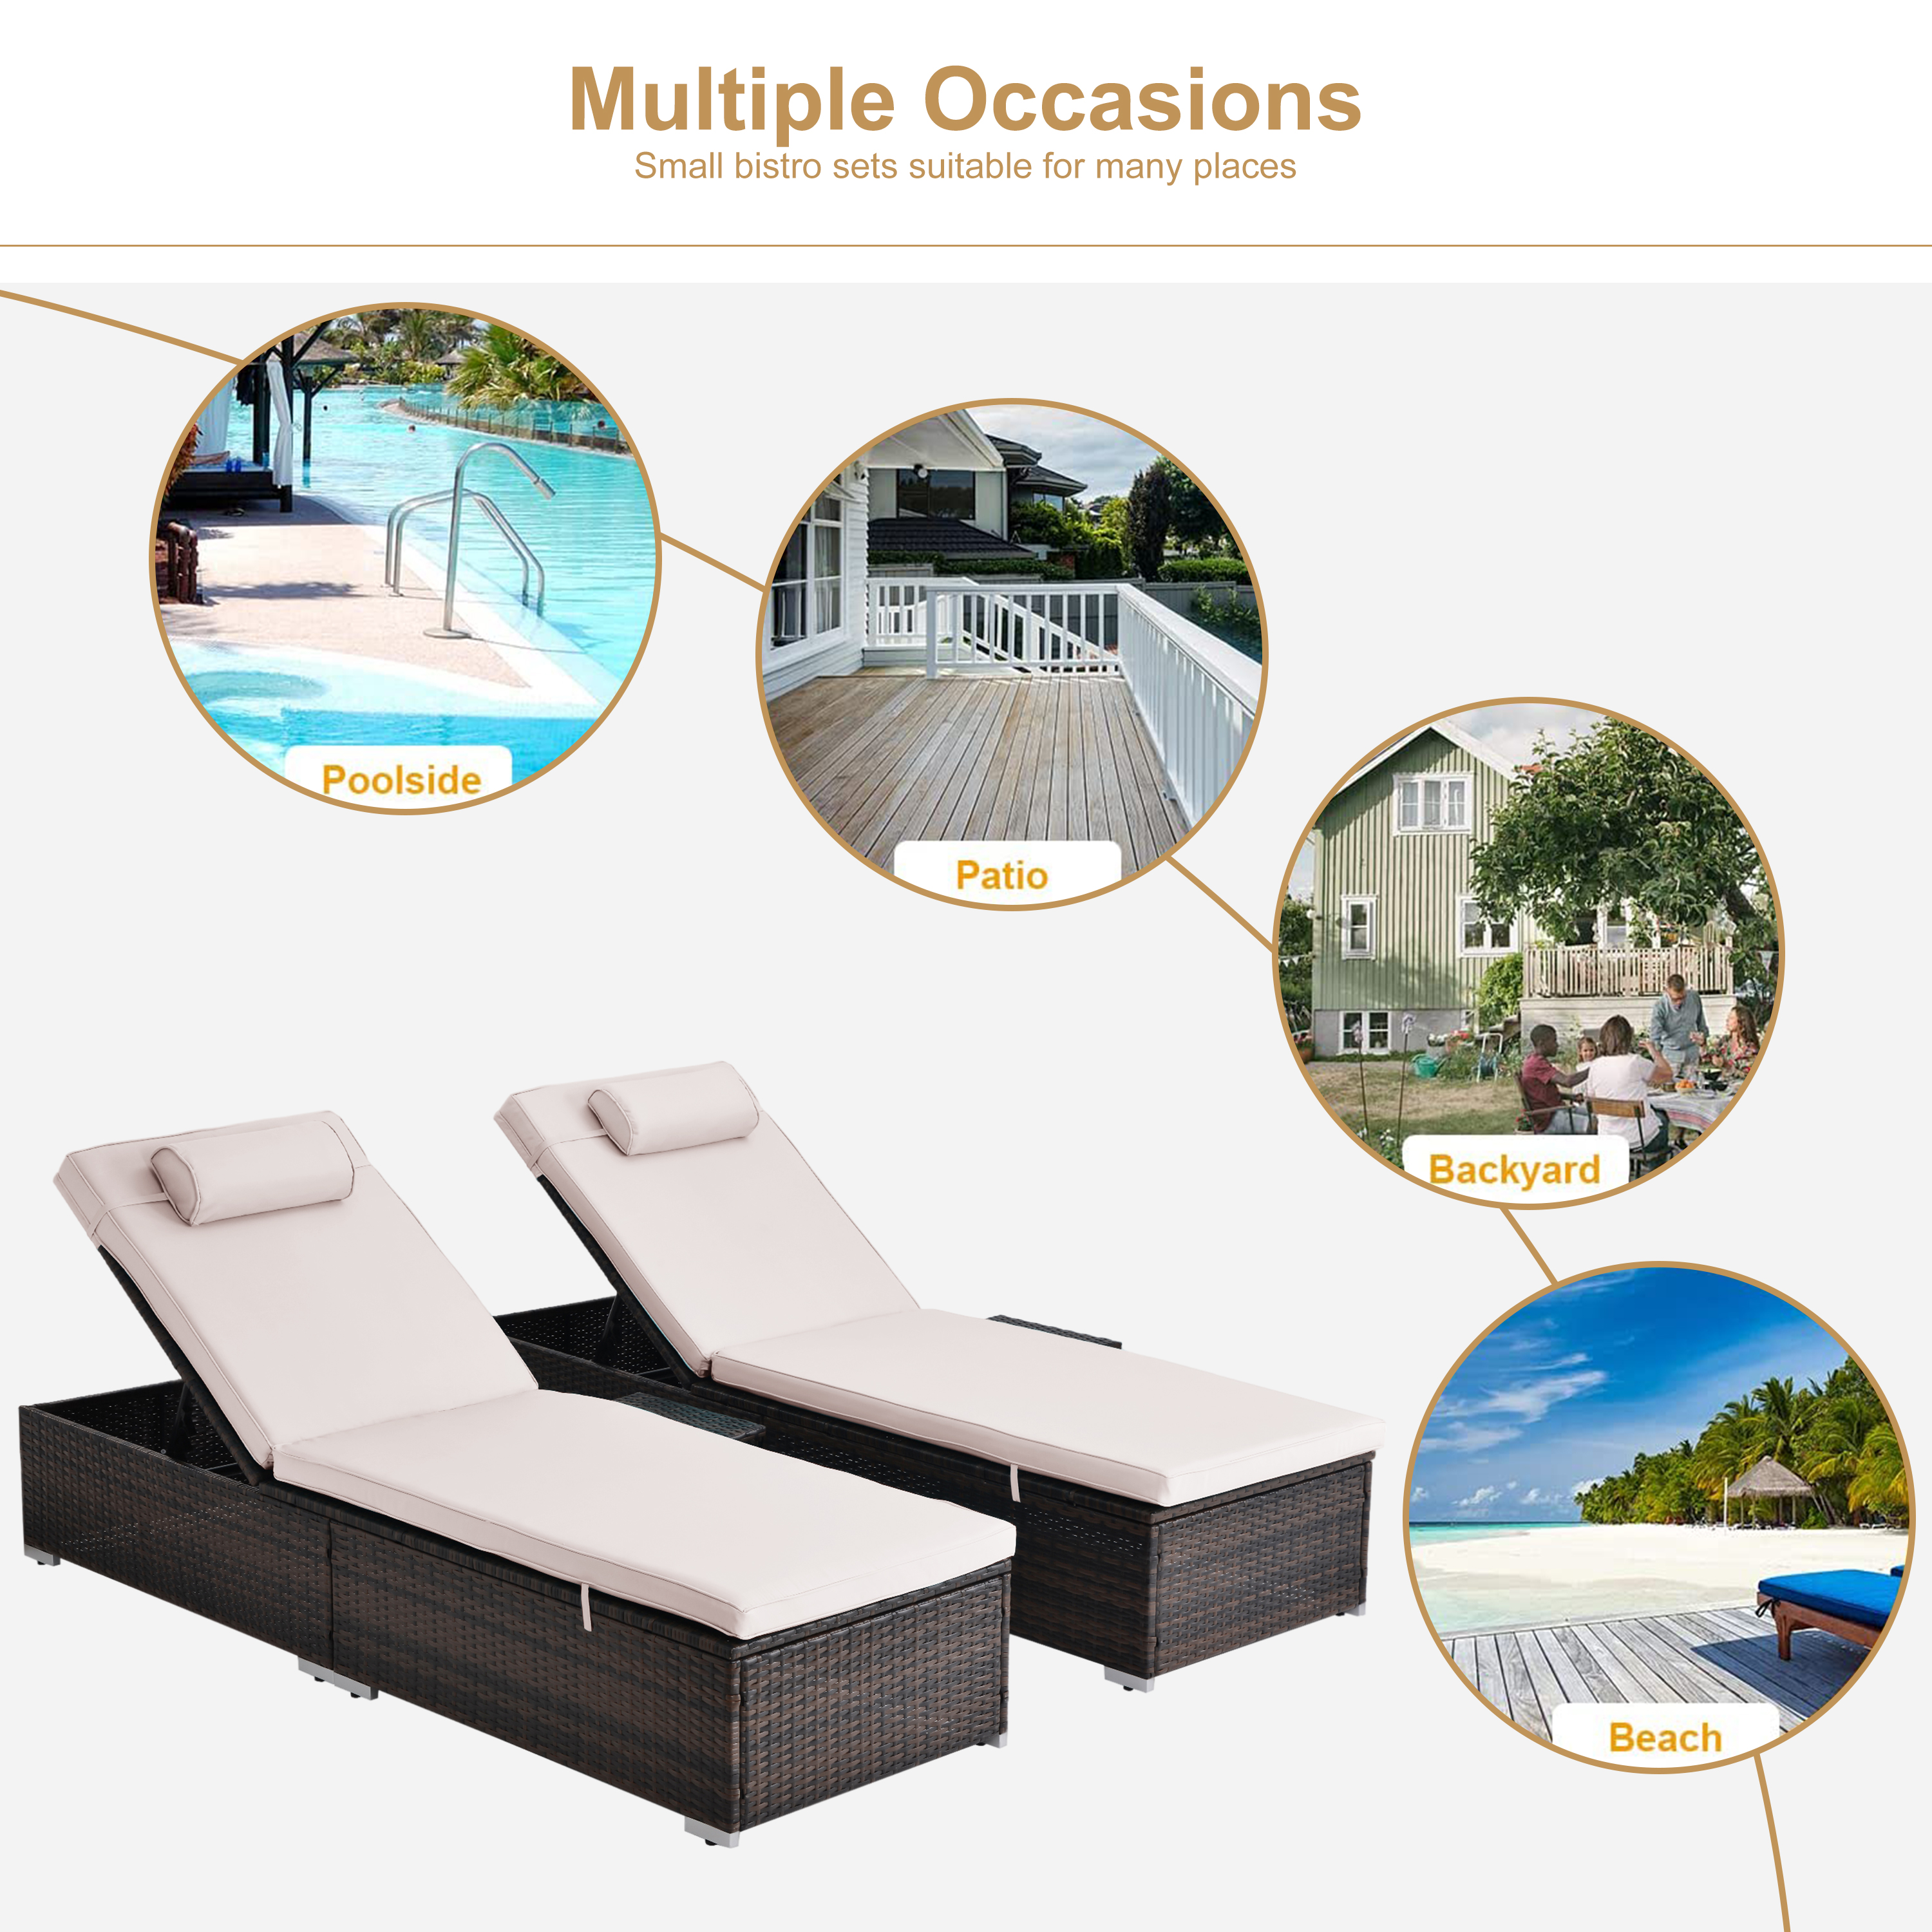 Outdoor Patio Lounge Furniture Set of 2, All-Weather Wicker Adjustable Backrest Recliners with Side Table, Pool Chaise Chairs Sets with Comfort Head Pillow, Glass Top Coffee Table, SS2349 - image 3 of 8